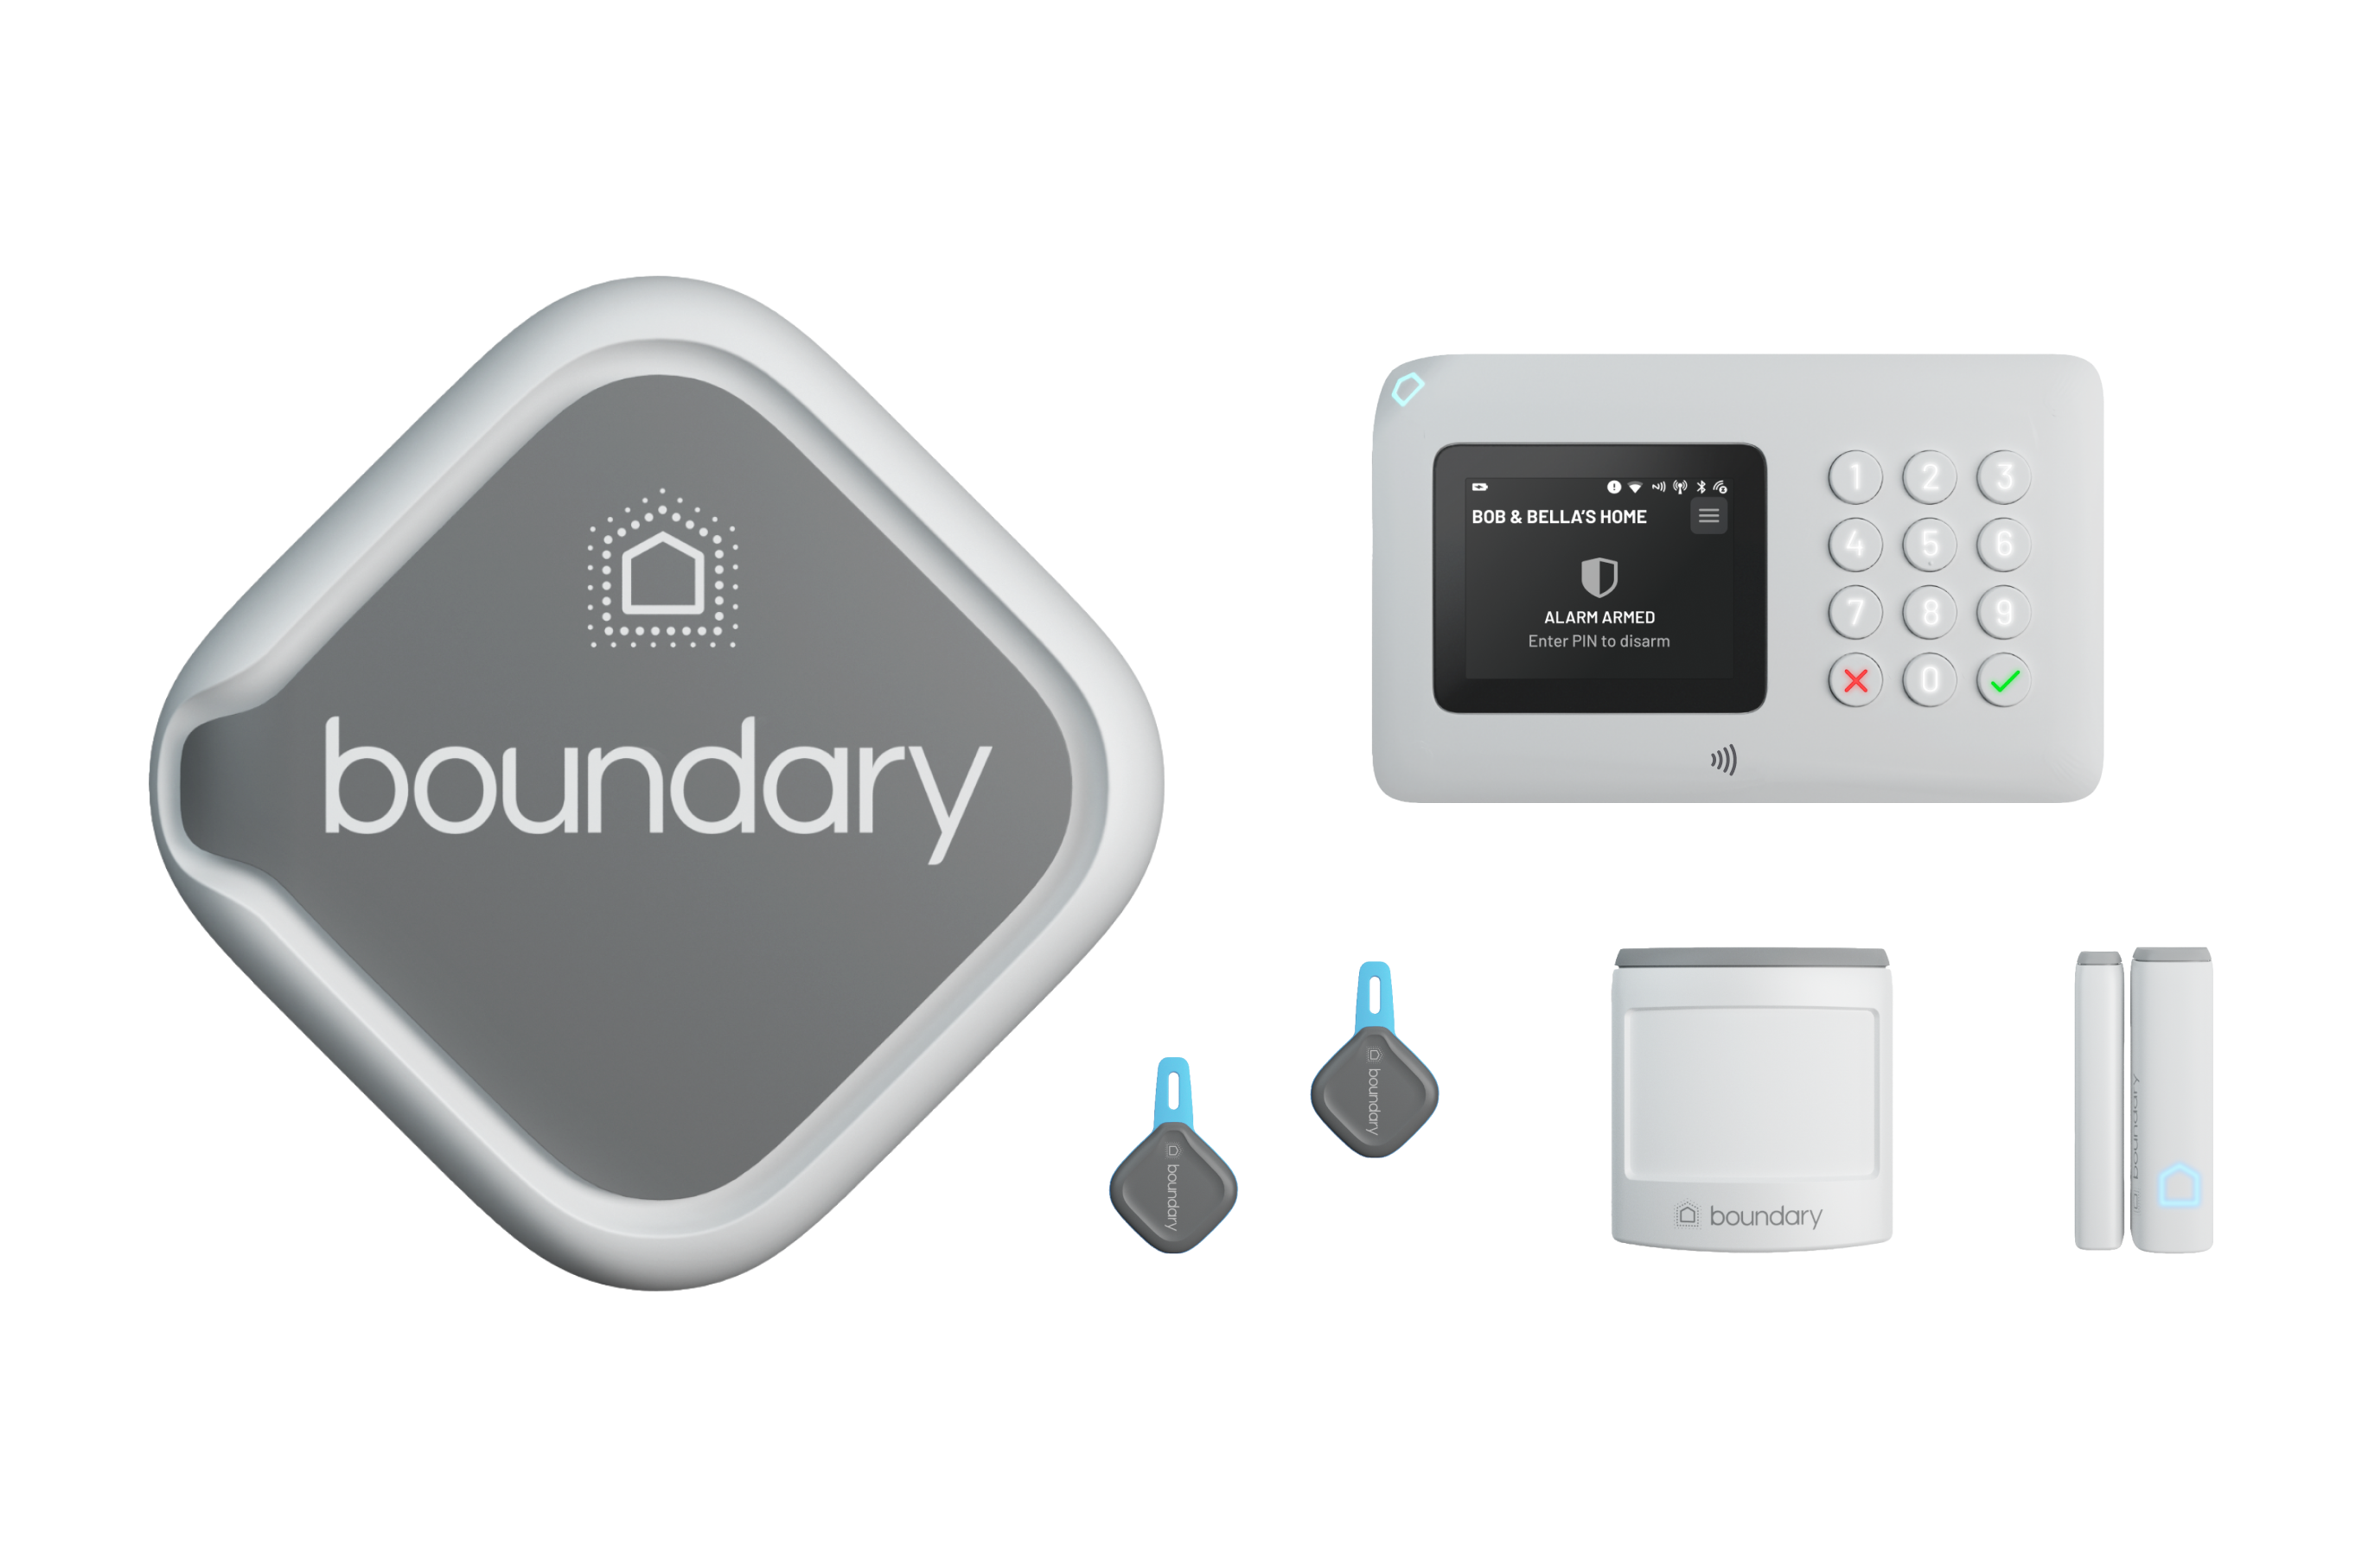 An image of the Boundary Smart Alarm System Hardware - Left to right, Outdoor Siren, Central Hub, Keyfobs, Motion Sensor, Contact Sensor.